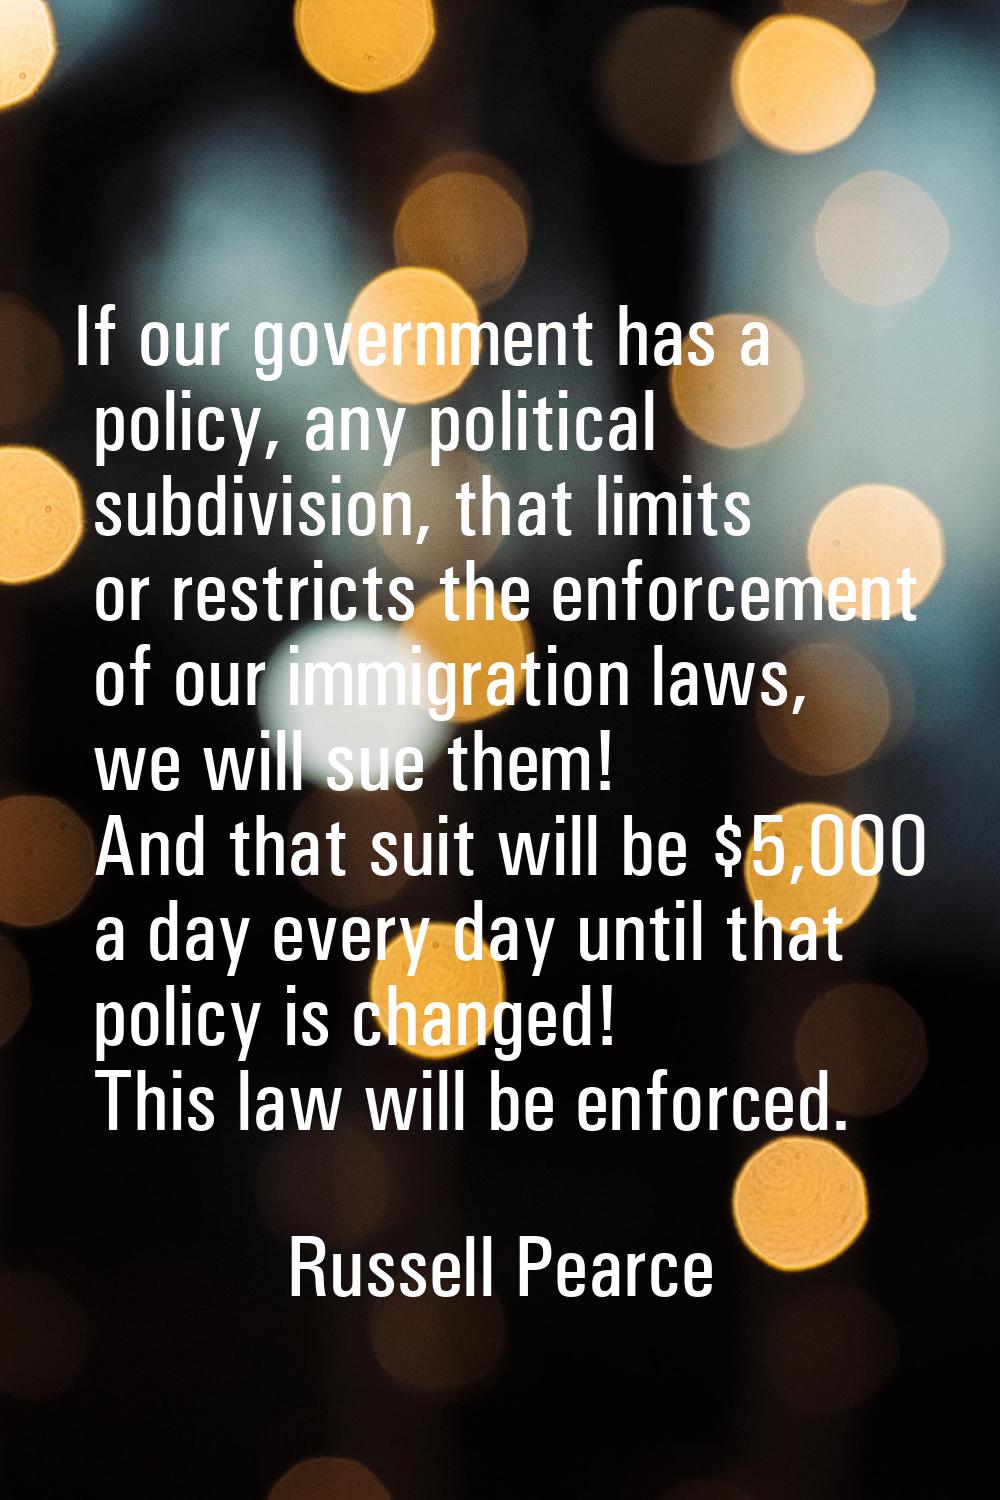 If our government has a policy, any political subdivision, that limits or restricts the enforcement